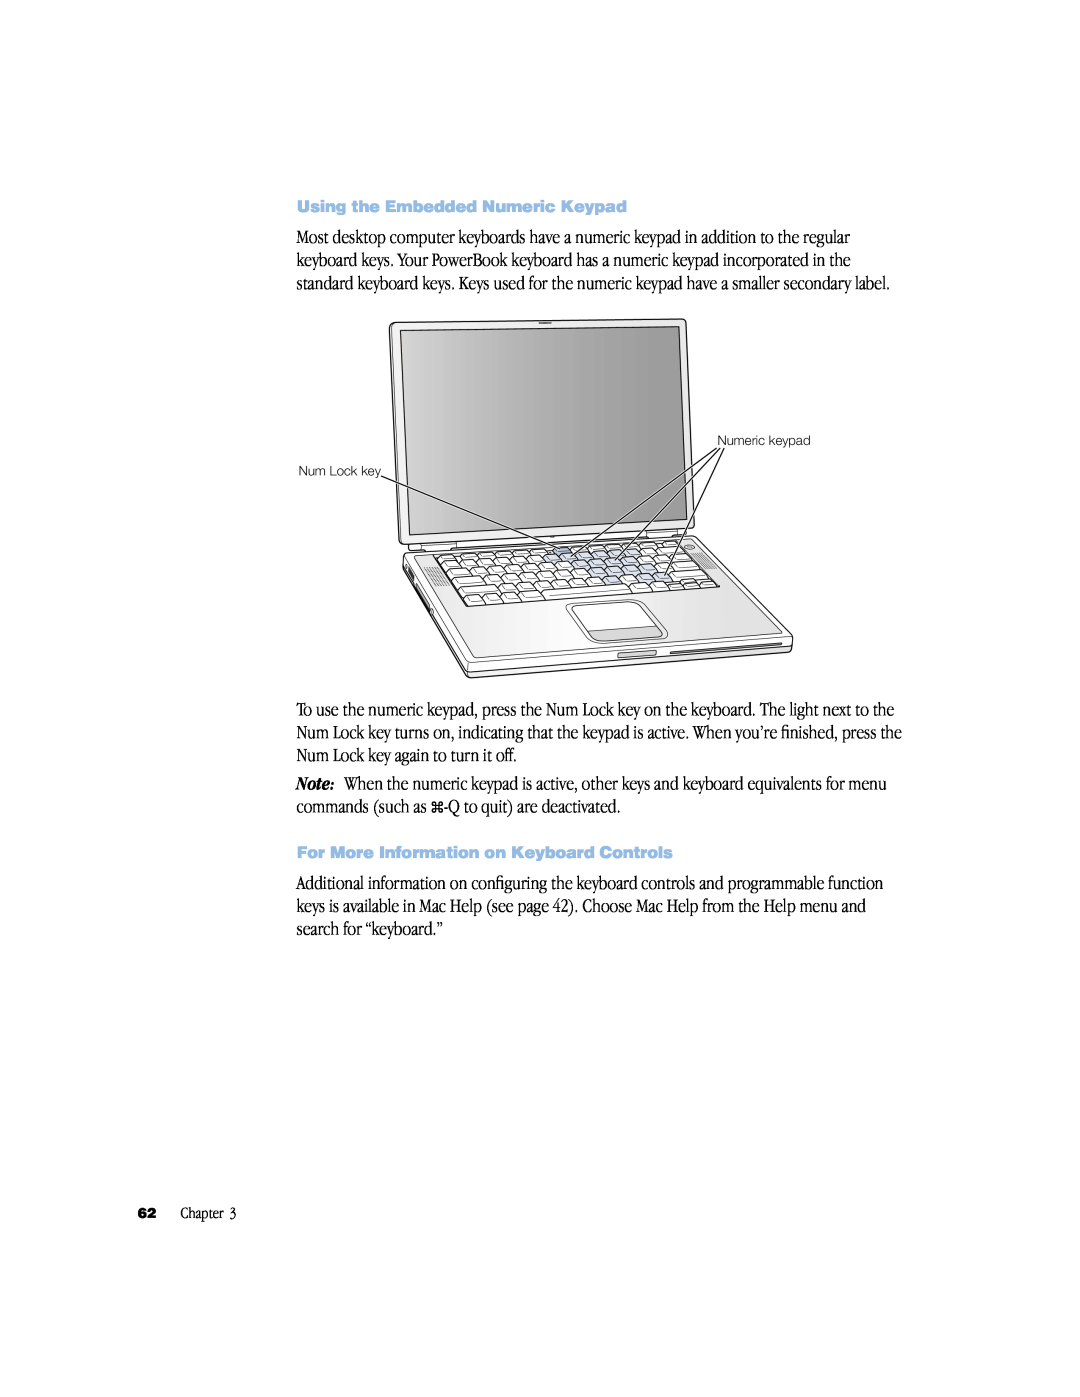 Apple powerbook g4 manual Using the Embedded Numeric Keypad, For More Information on Keyboard Controls, Chapter 